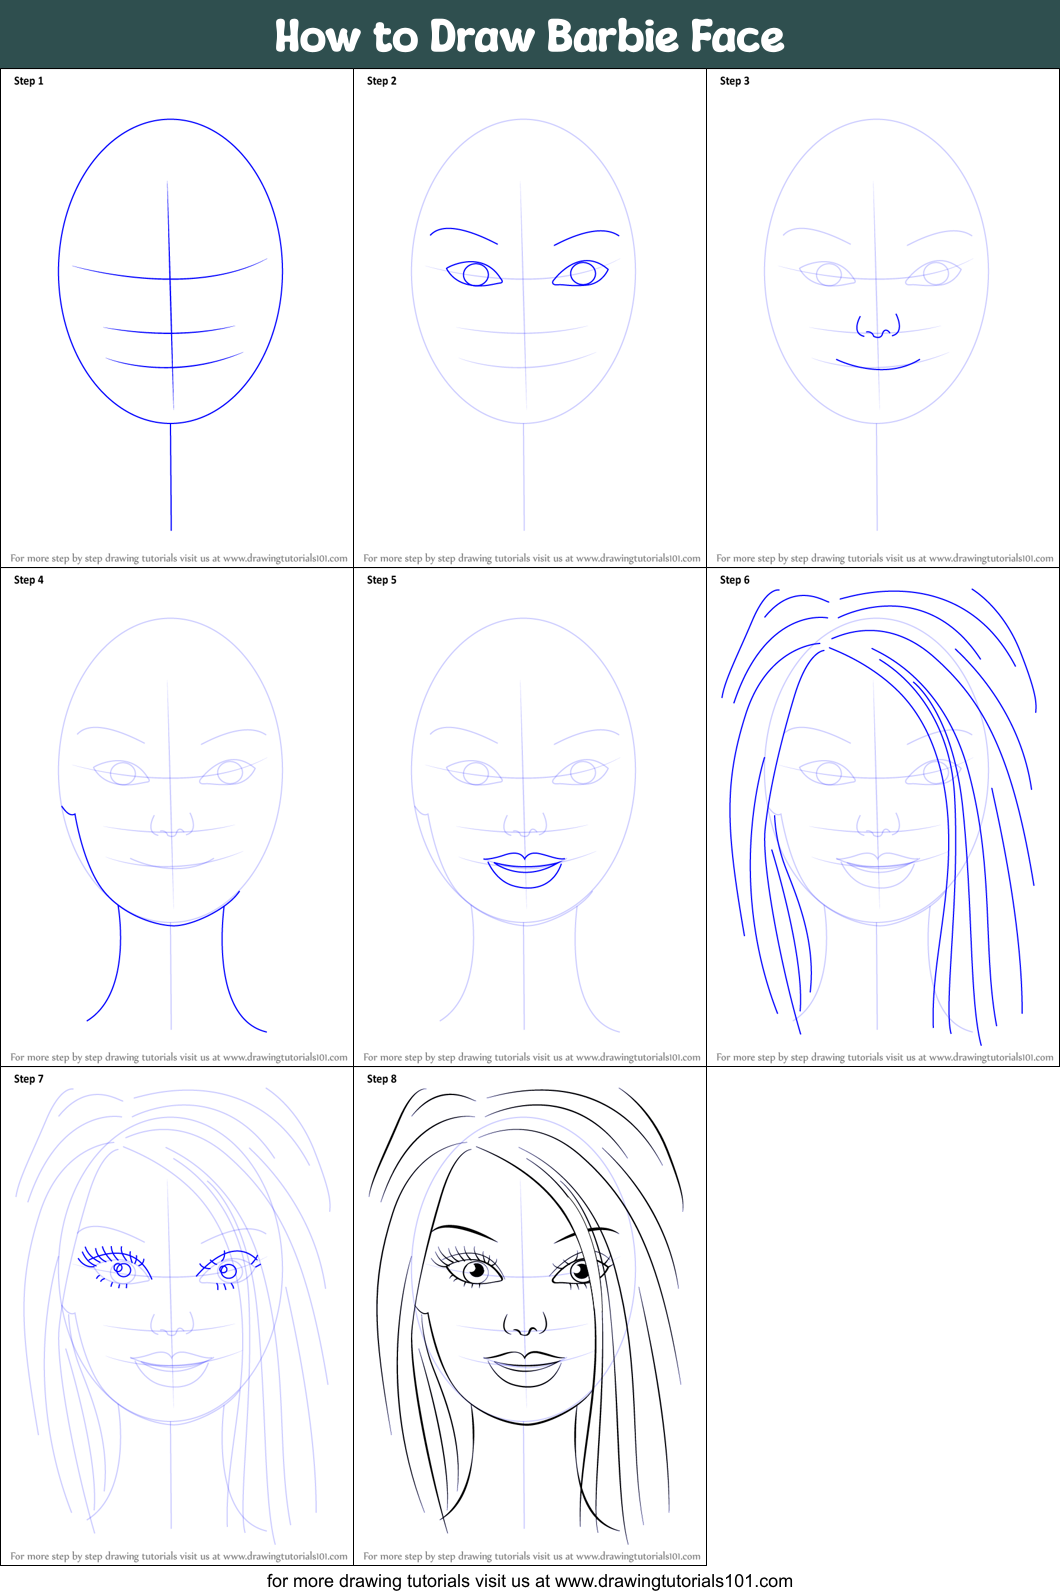 Search Results for “Barbie Face Drawing” – Calendar 2015